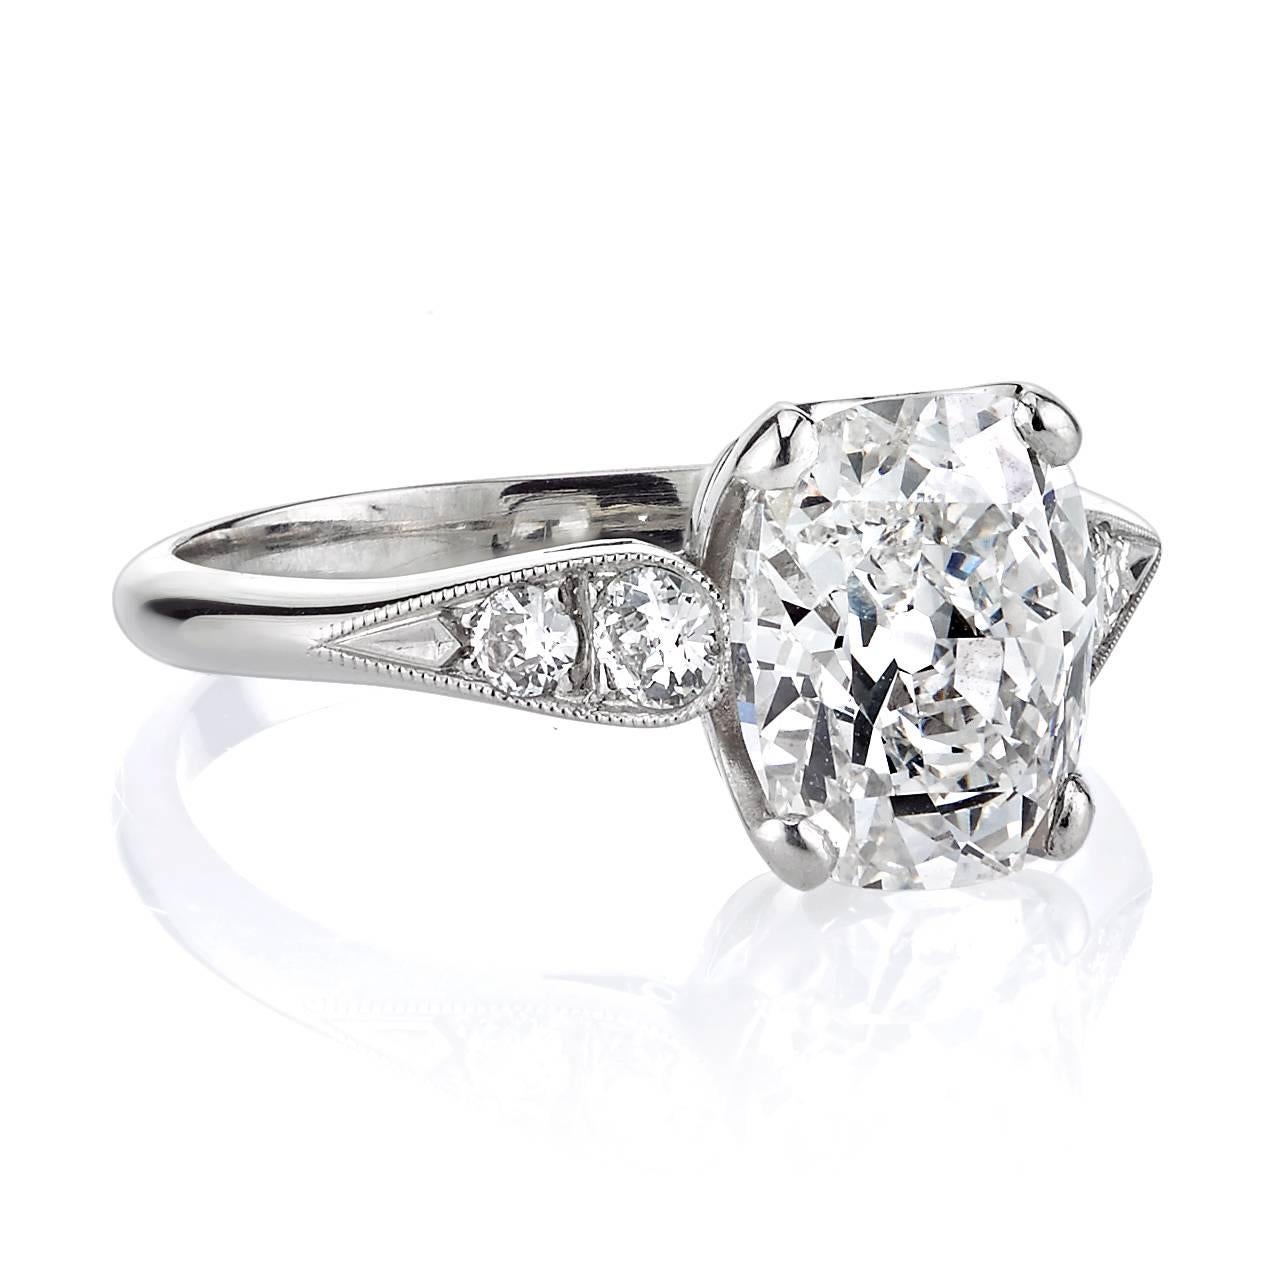 2.33ct G/SI1 GIA certified vintage Cushion cut diamond set in a handcrafted platinum mounting. A classic design featuring a prong set diamond and a tapering band.